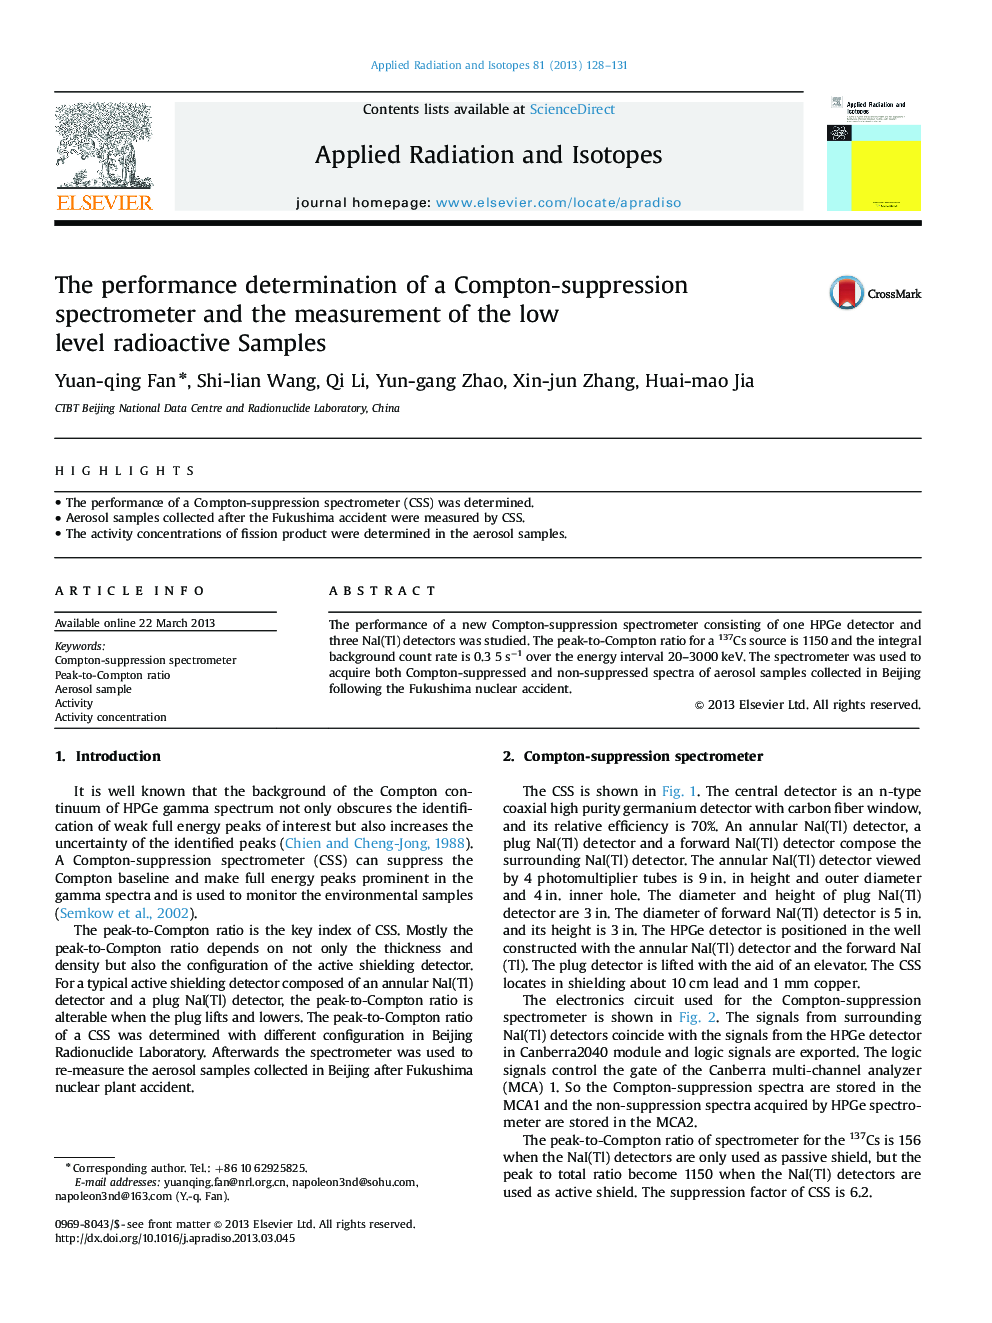 The performance determination of a Compton-suppression spectrometer and the measurement of the low level radioactive Samples